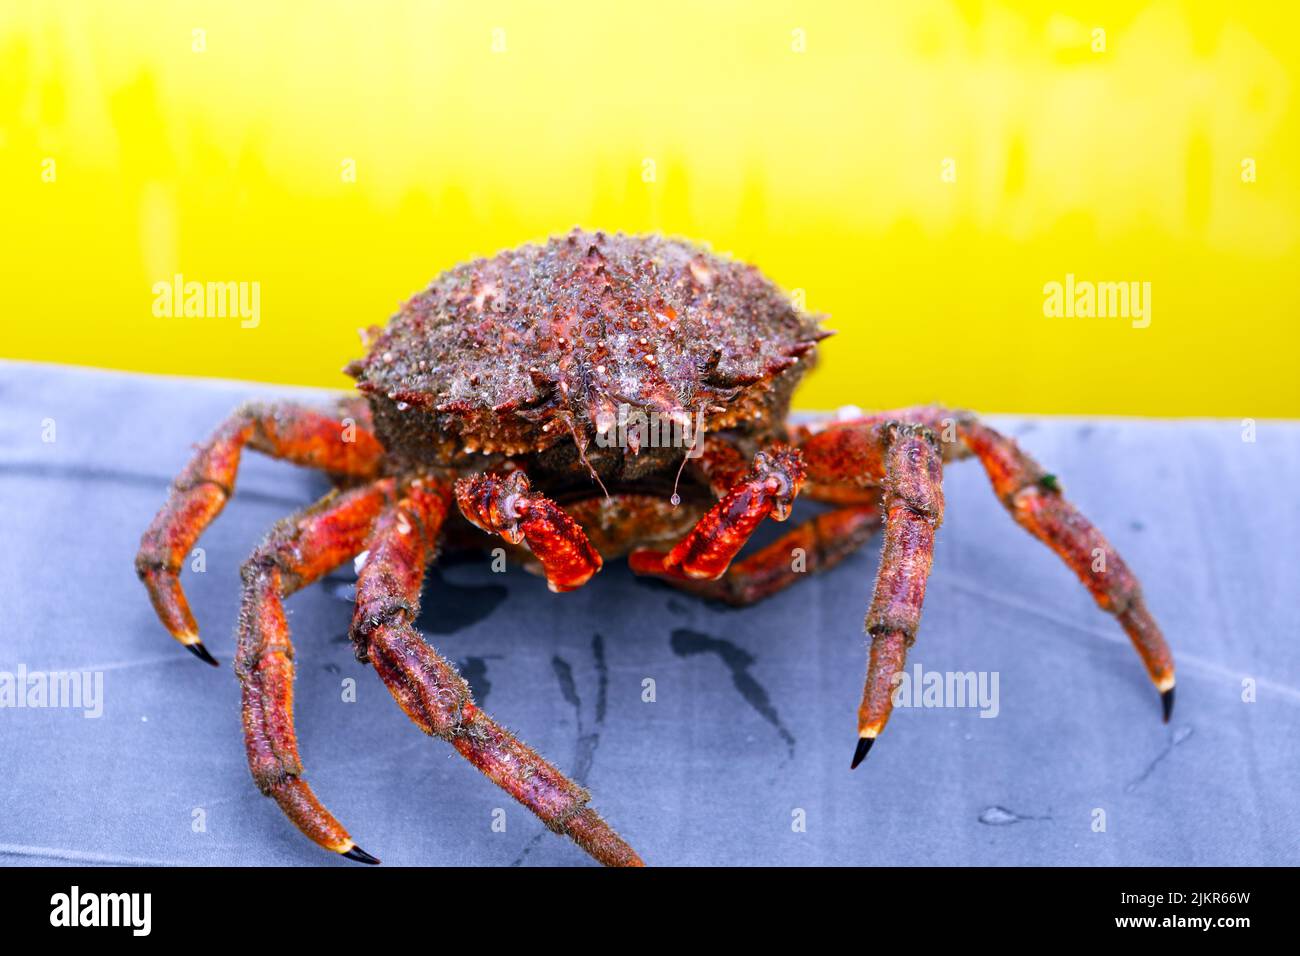 Spider crab (Maja brachydactyla) off the coast of the Isle of Mull in the Inner Hebrides of Scotland Stock Photo